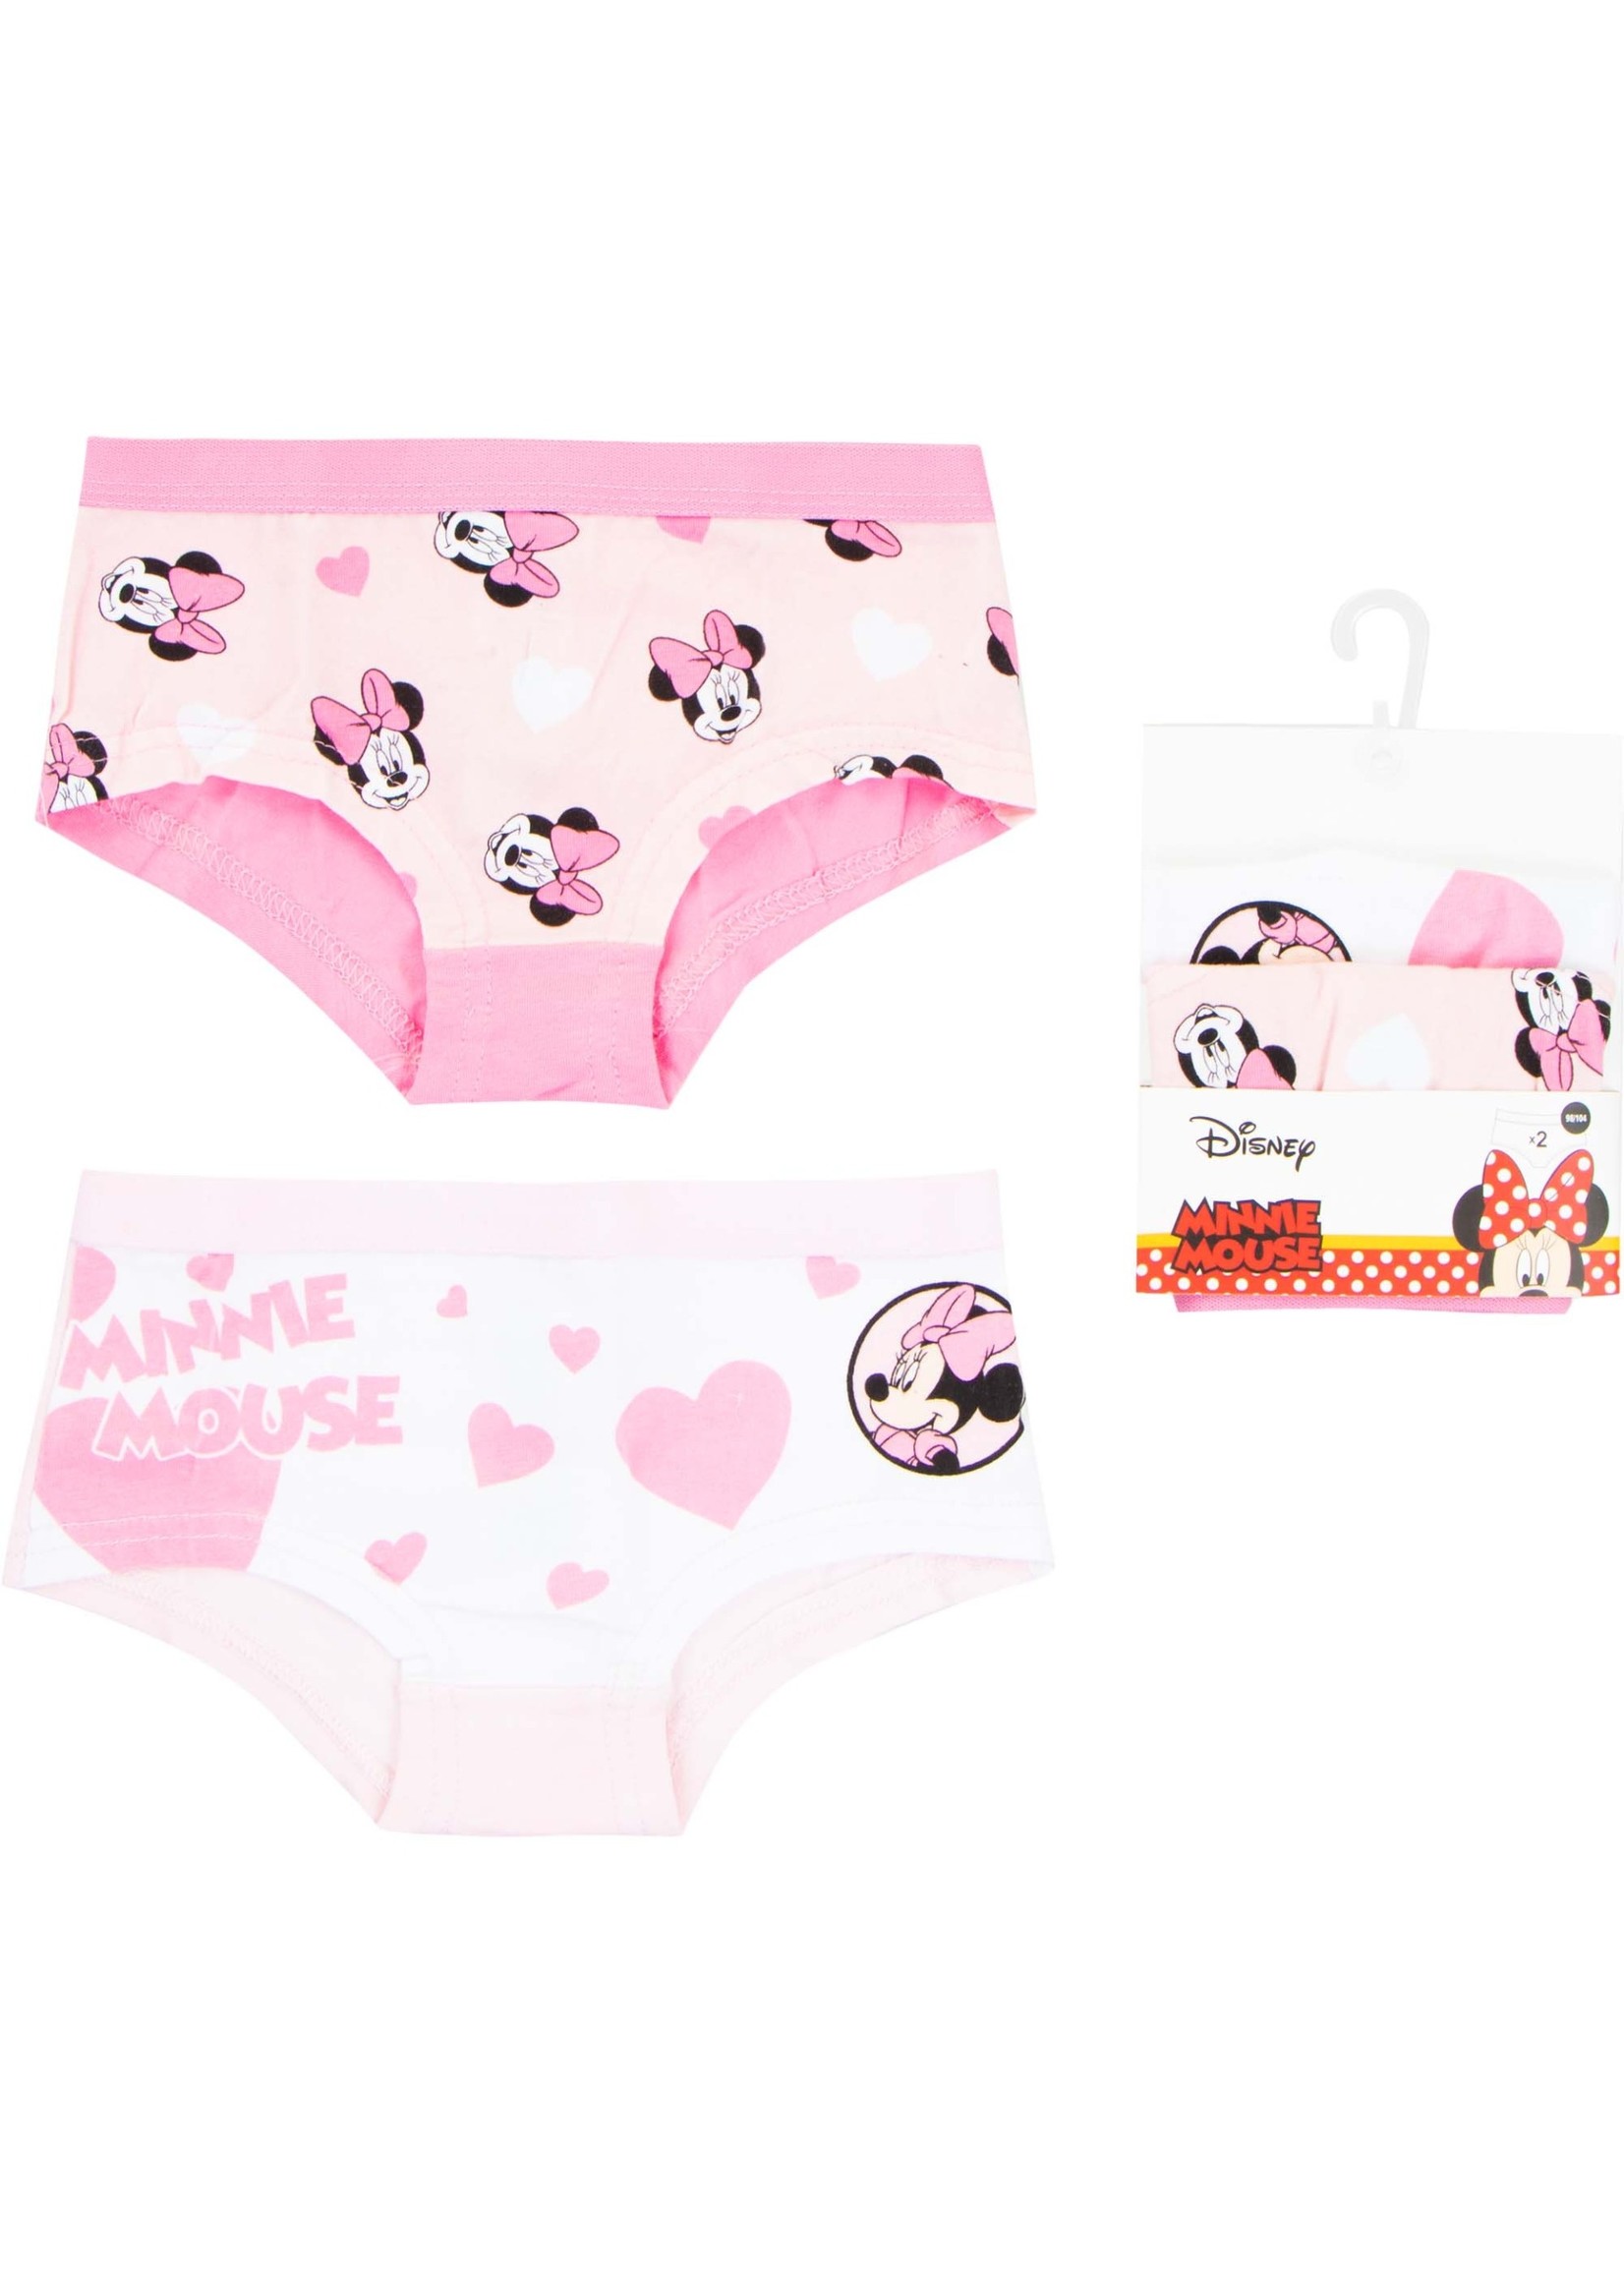 Disney Minnie Mouse boxers from Disney 2 pack